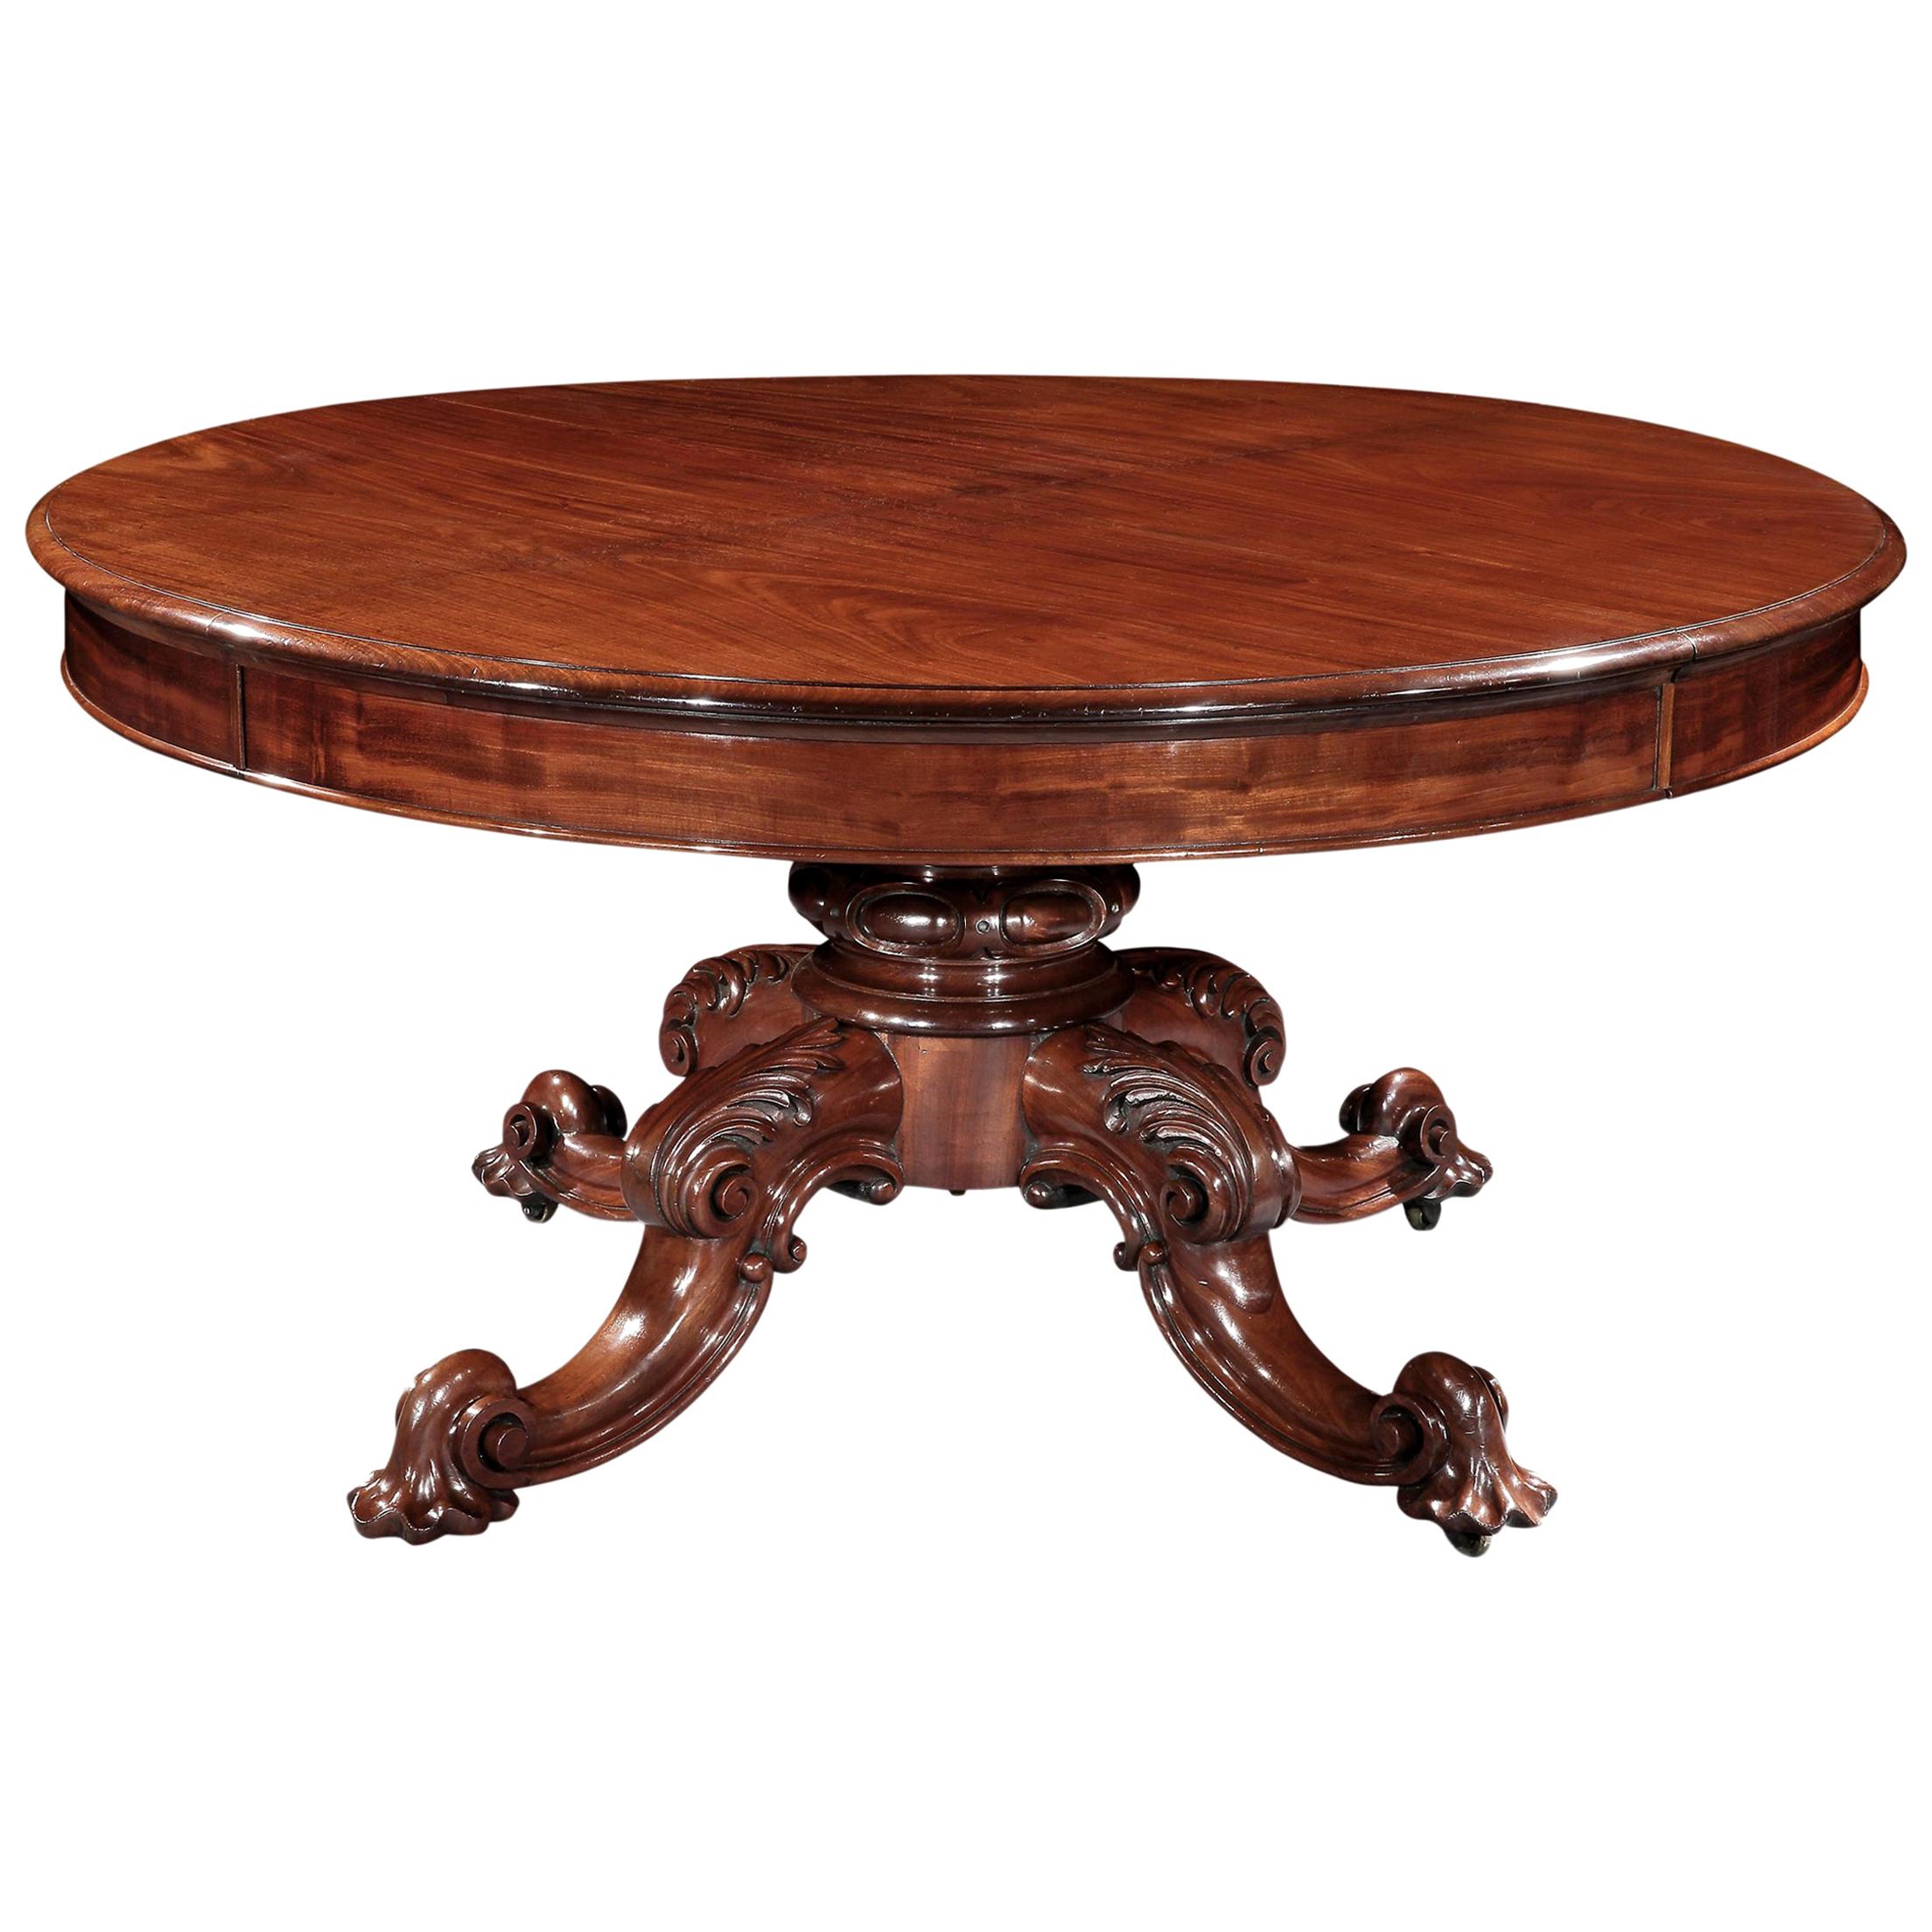 Handsome 19th Century Mahogany Dining Table with Unusual Wind-Out Mechanism